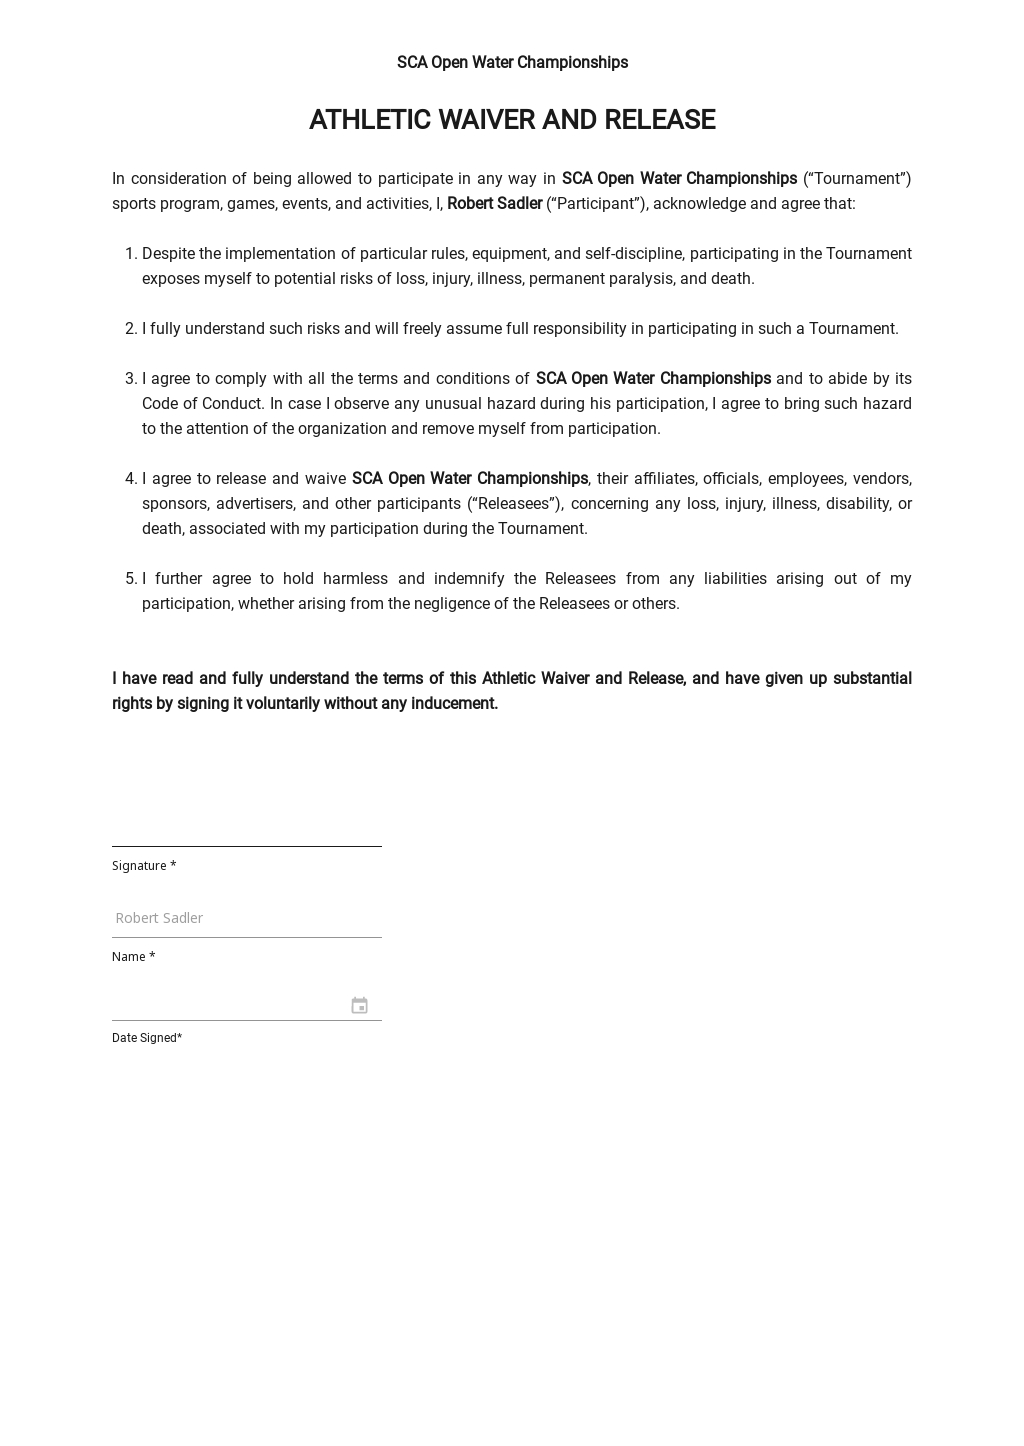 Athletic Waiver and Release Template.jpe